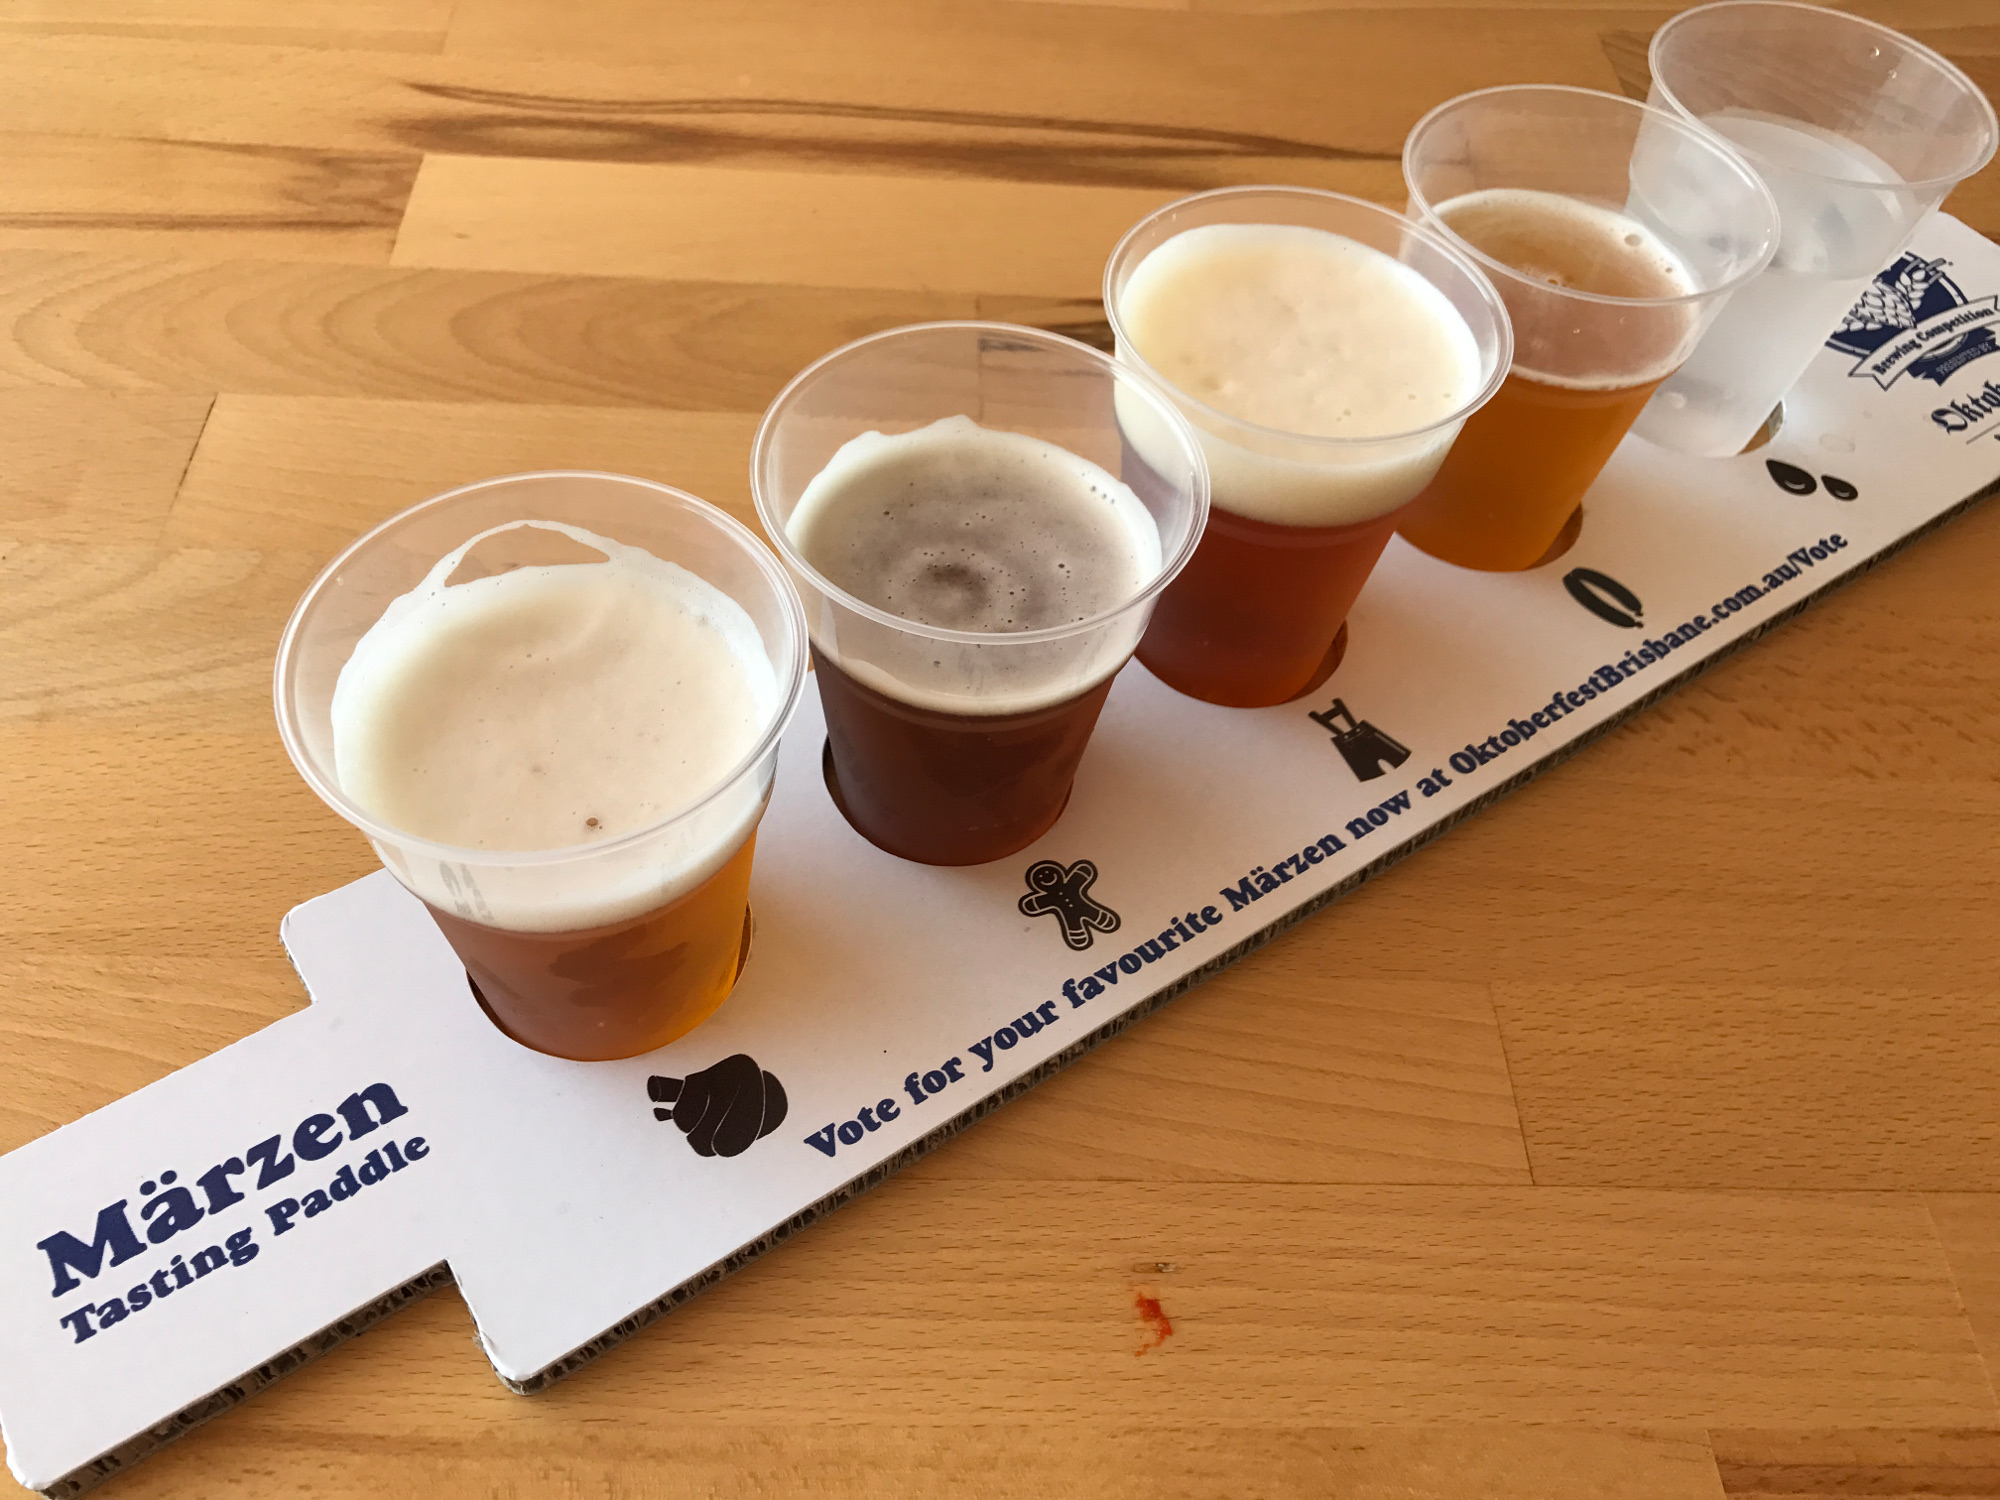 Bavarian Brewing Competition voting paddle